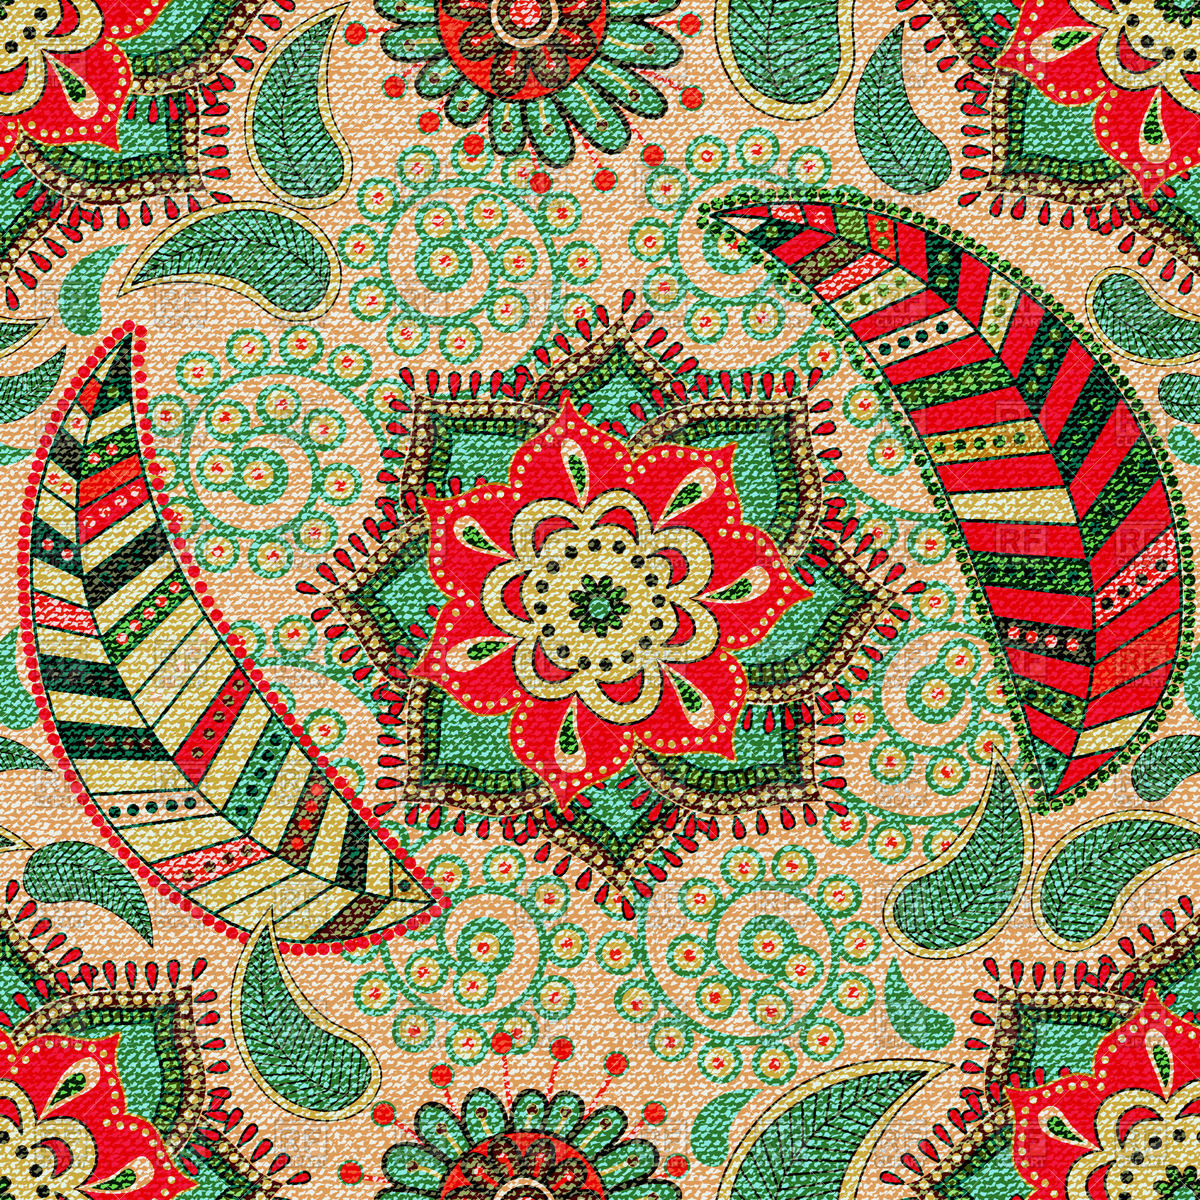 Paisley Seamless Pattern With Flowers 56598 Download Royalty Free